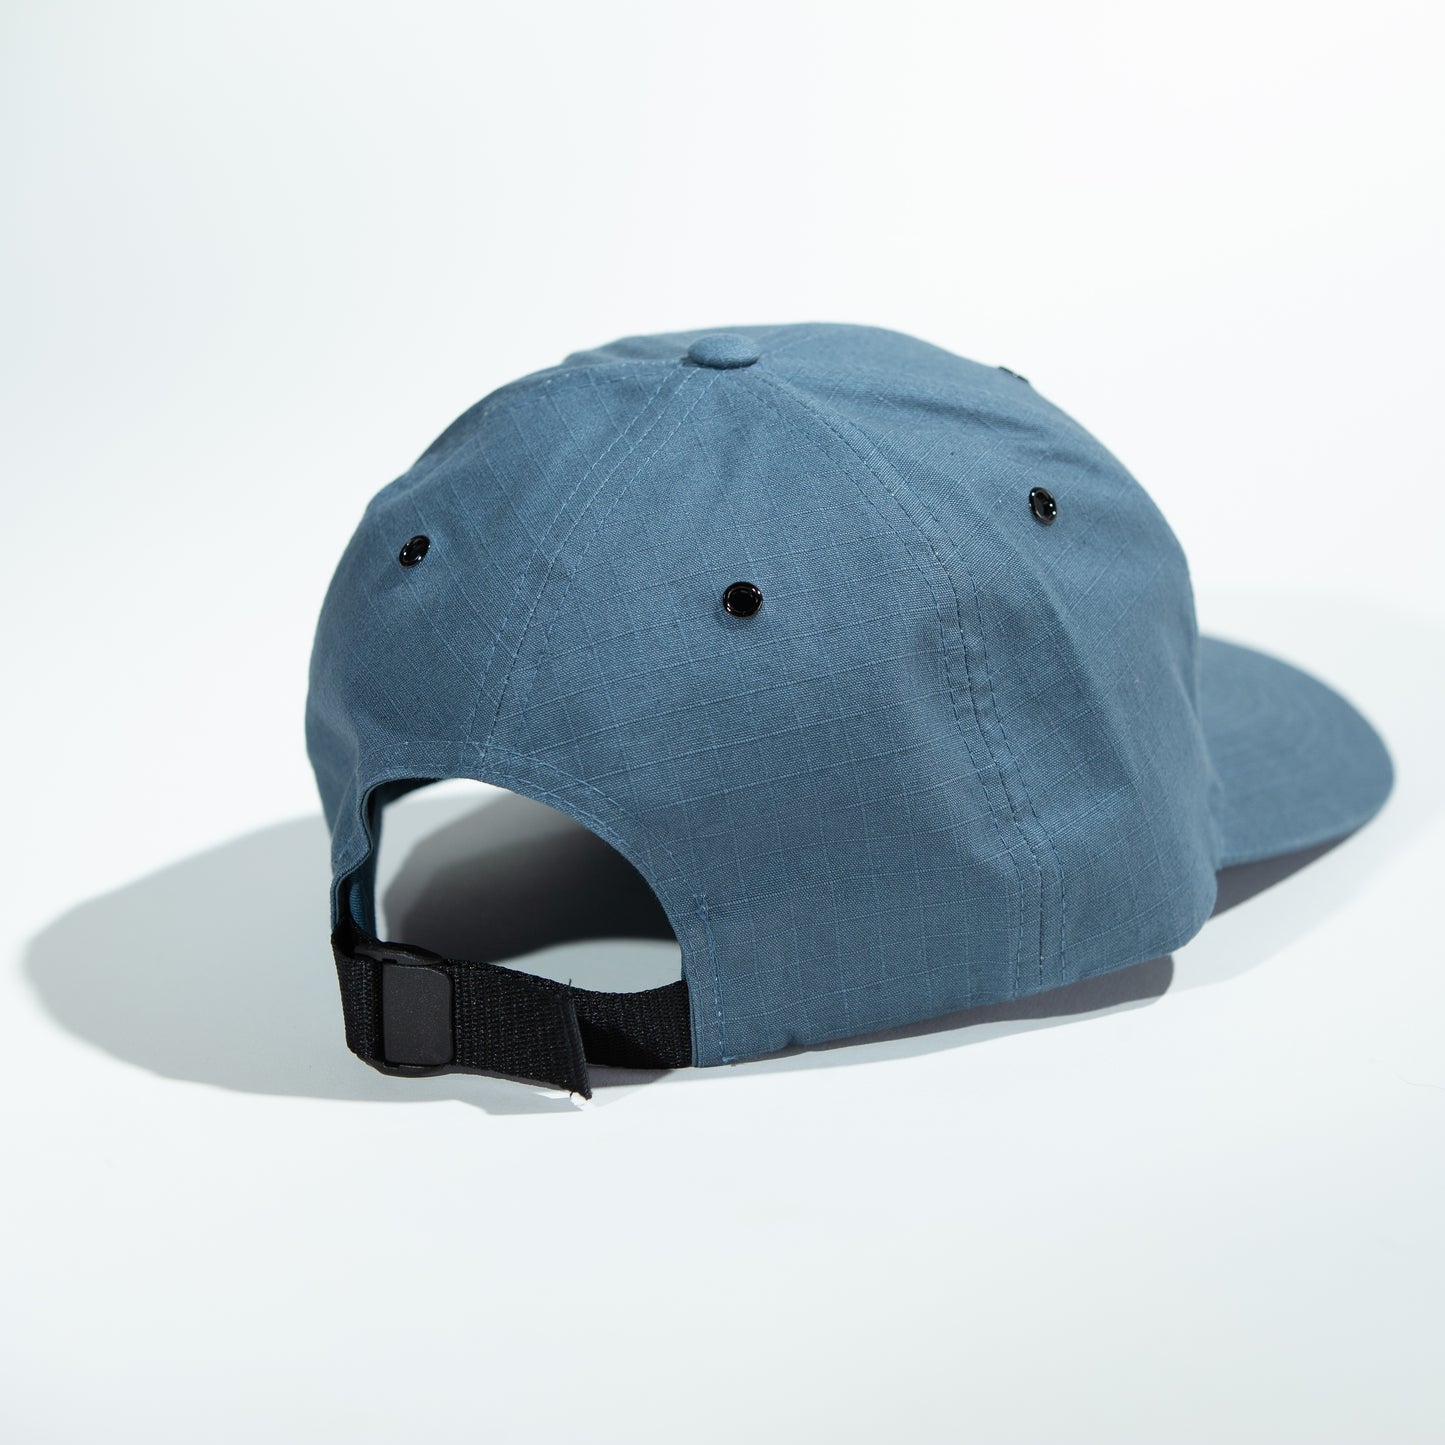 A Blue Outdoor Strapback Hat with the Black and White Nakke Duck Logo Patch